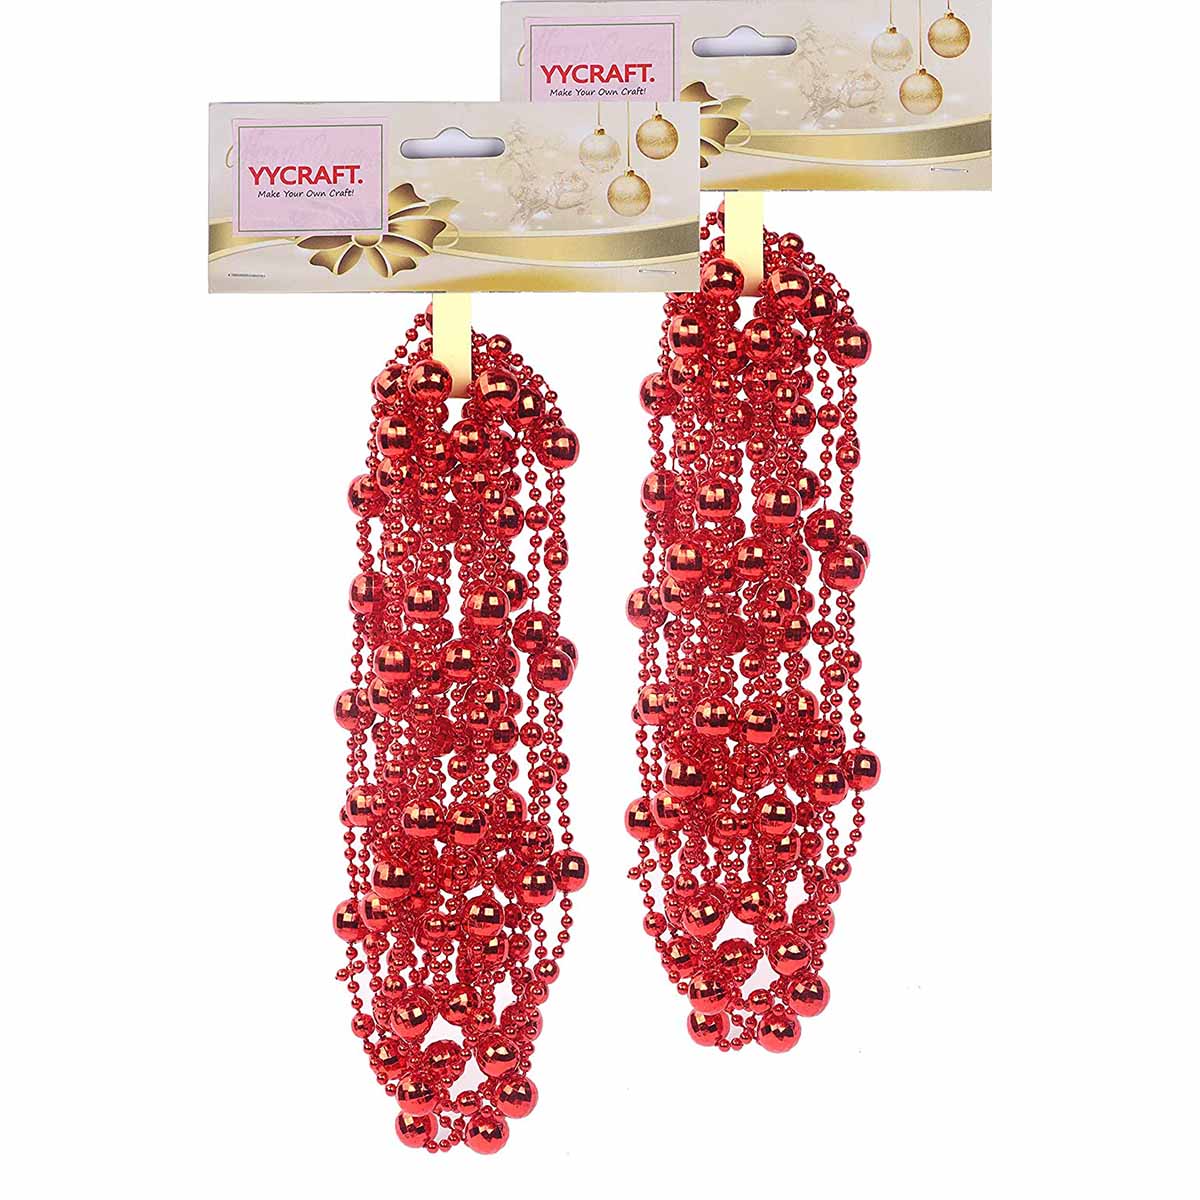 36 Feet Bead Garland Earth Beads,2 Pack Red